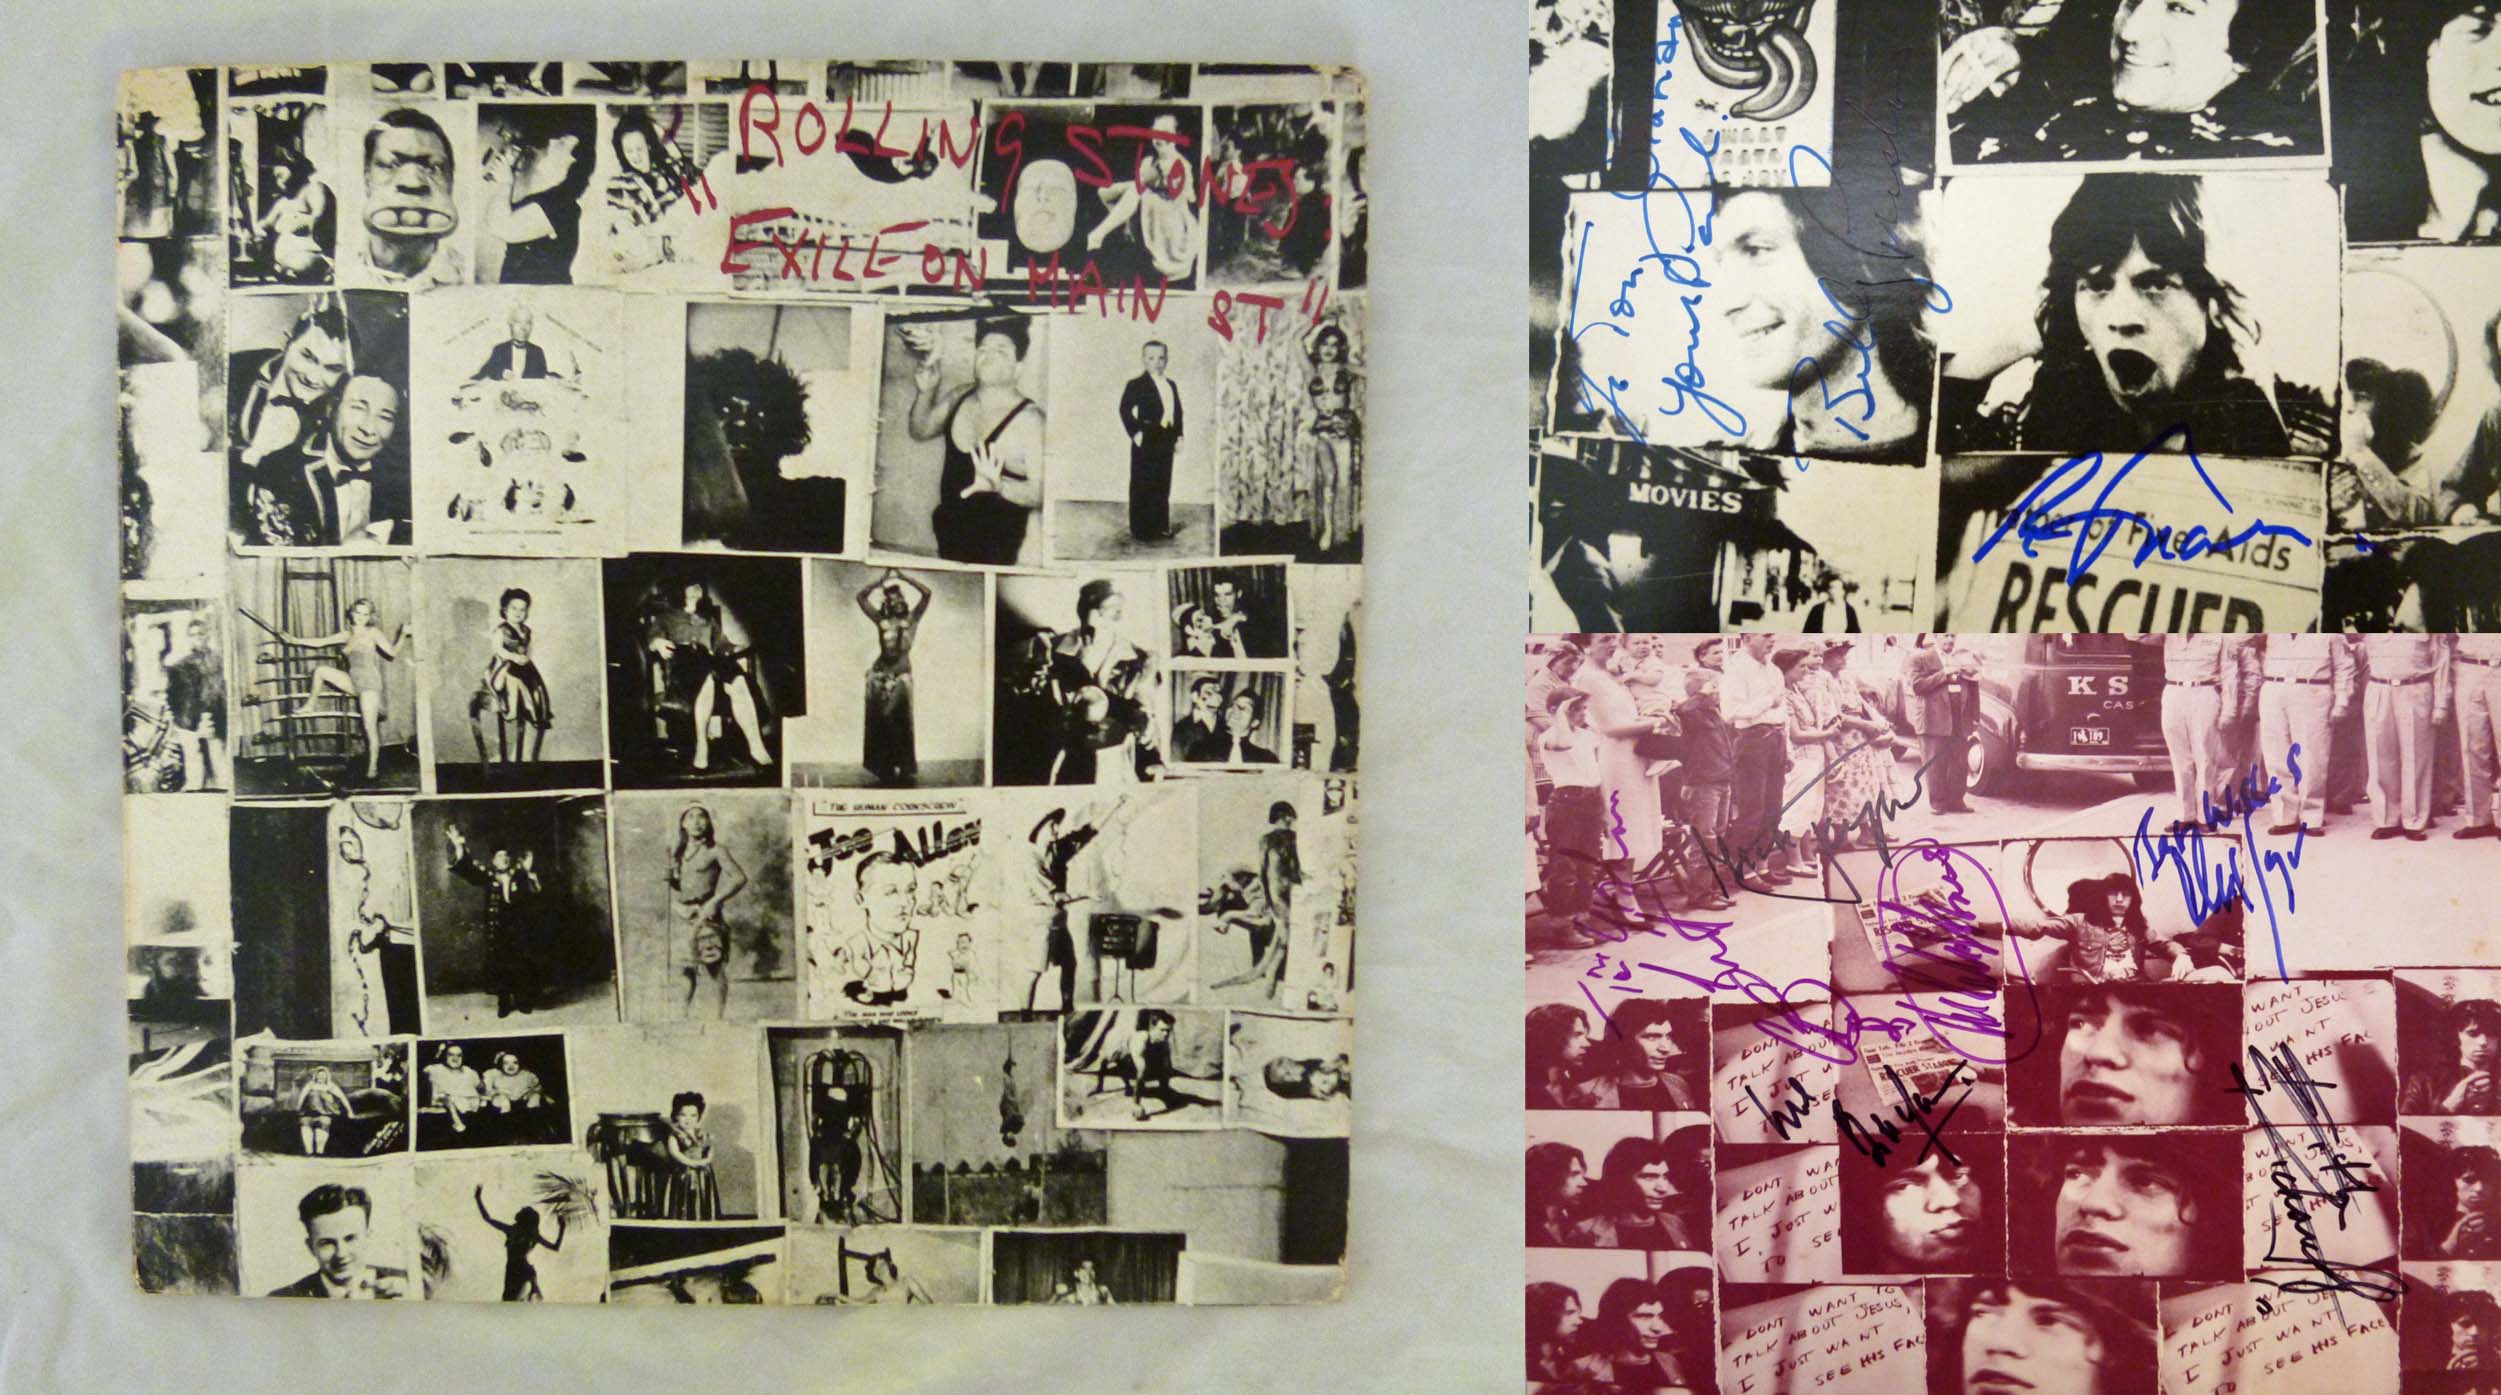 A signed copy of The Rolling Stones 'Exile on Main Street' vinyl LP, amongst the autographs is